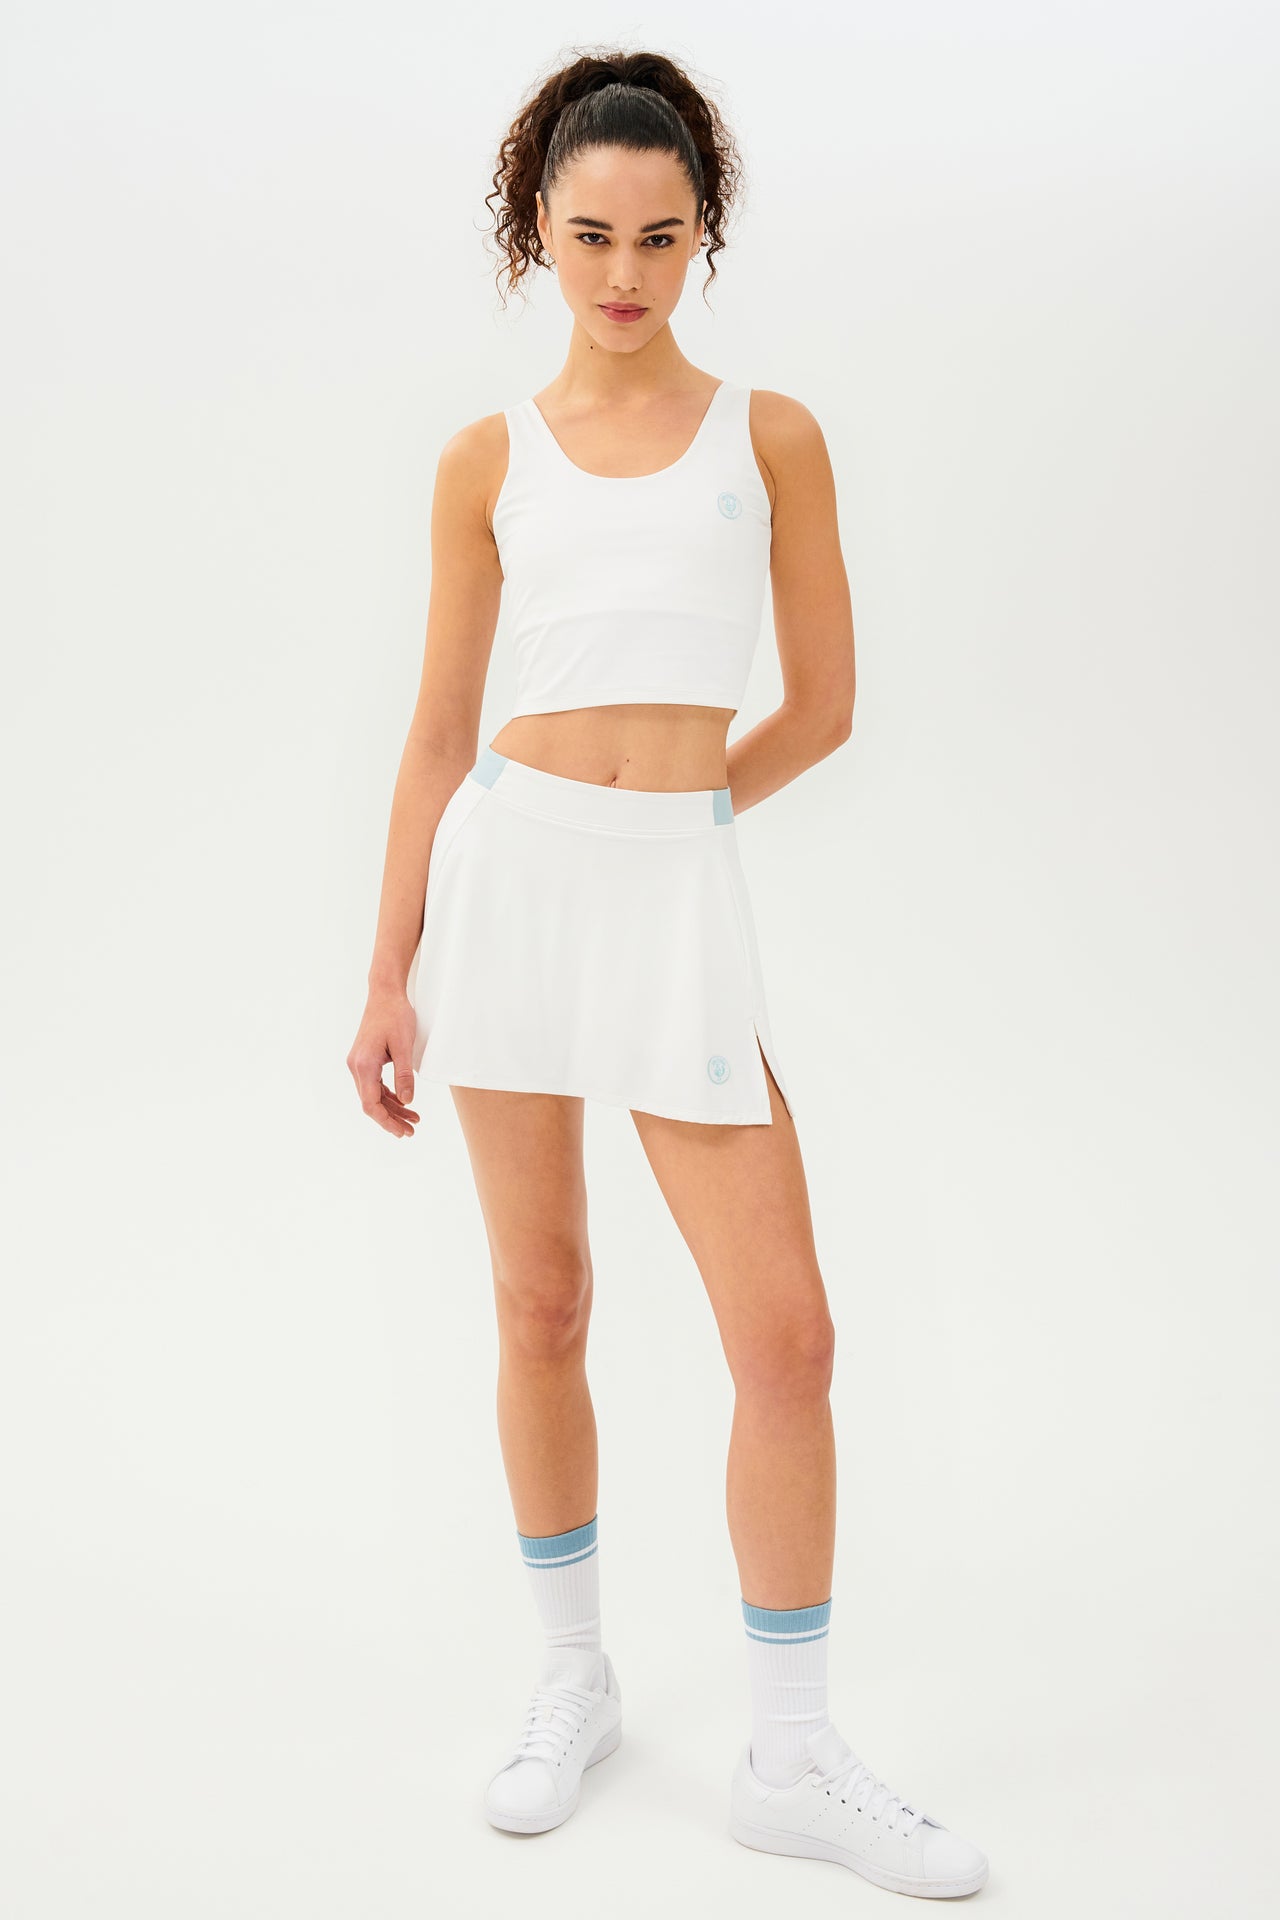 Front full view of woman with dark curly hair in a ponytail wearing a cropped white tank bra with white skort with teal details on the waistband and logo. Model is wearing white socks with teal stripe and all white shoes